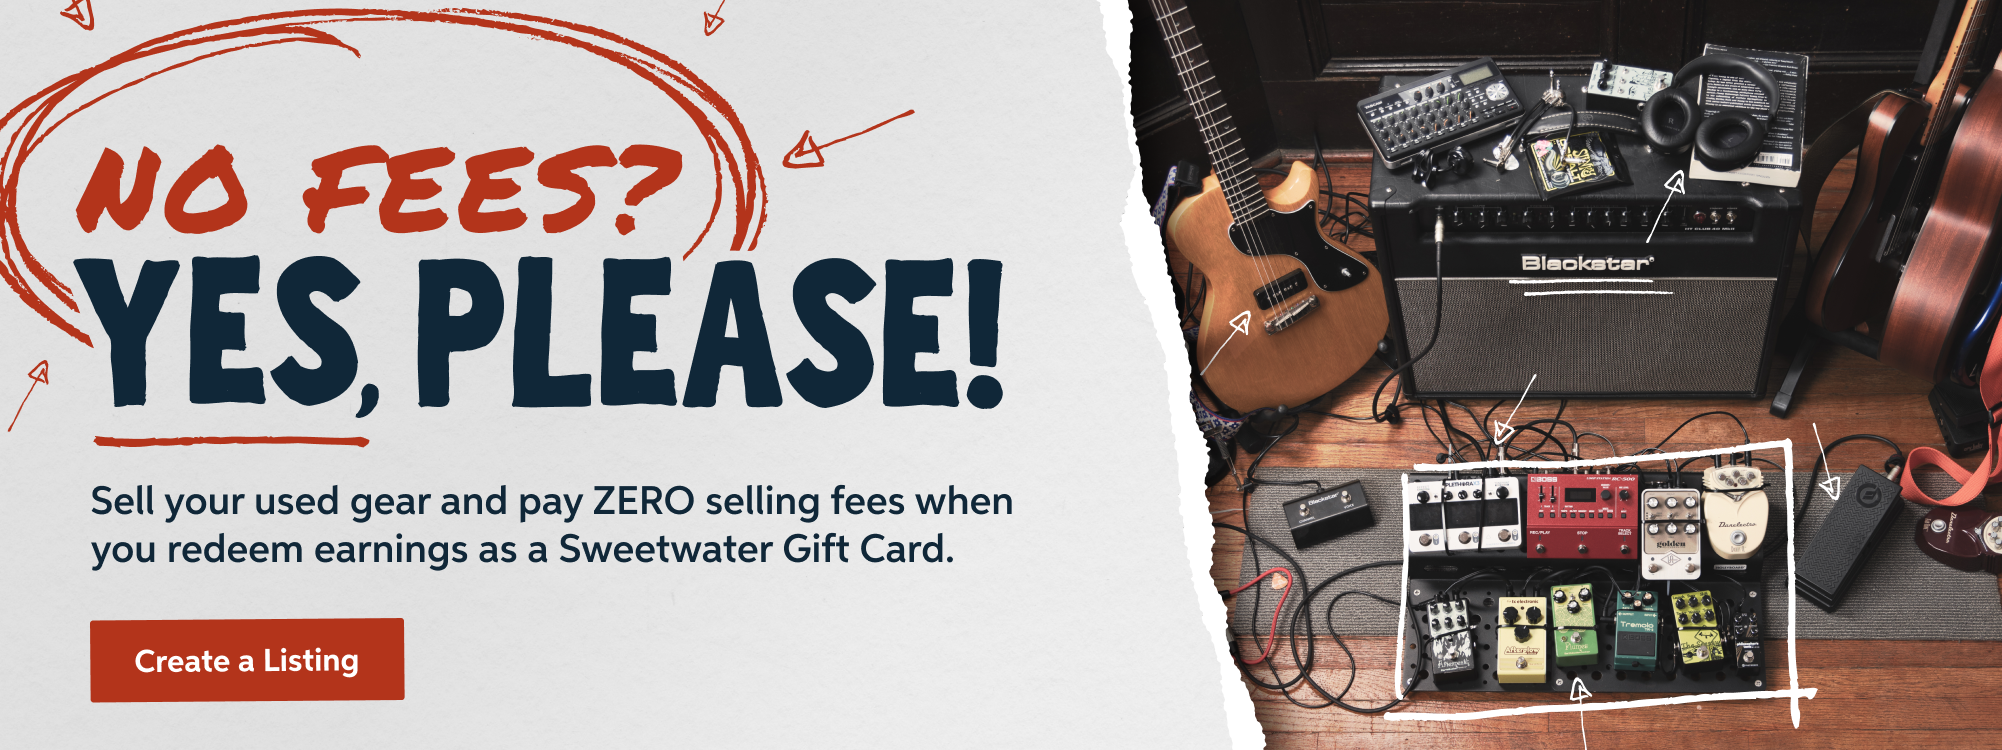 No fees? YES PLEASE! Sell your used gear and pay ZERO selling fees when you redeem earnings as a Sweetwater gift card! Click to create a listing.